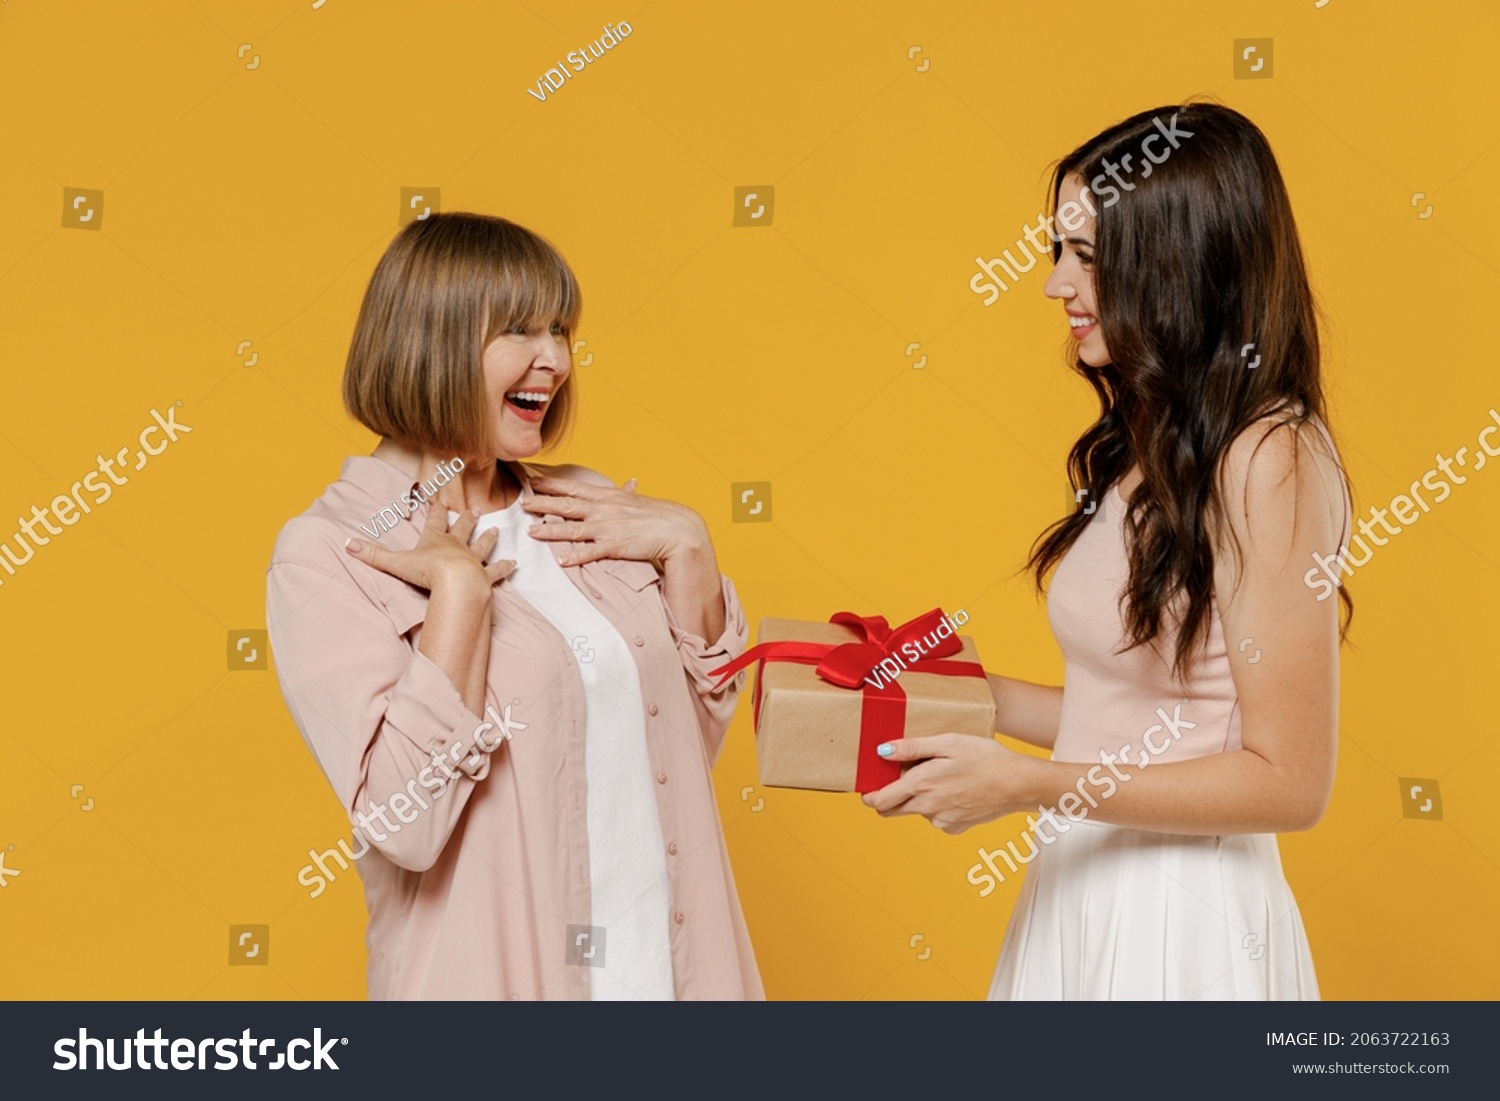 Side view two fun young smiling happy daughter mother together couple women in casual beige clothes gifting birthday present with red ribbon isolated on plain yellow color background studio portrait. #2063722163